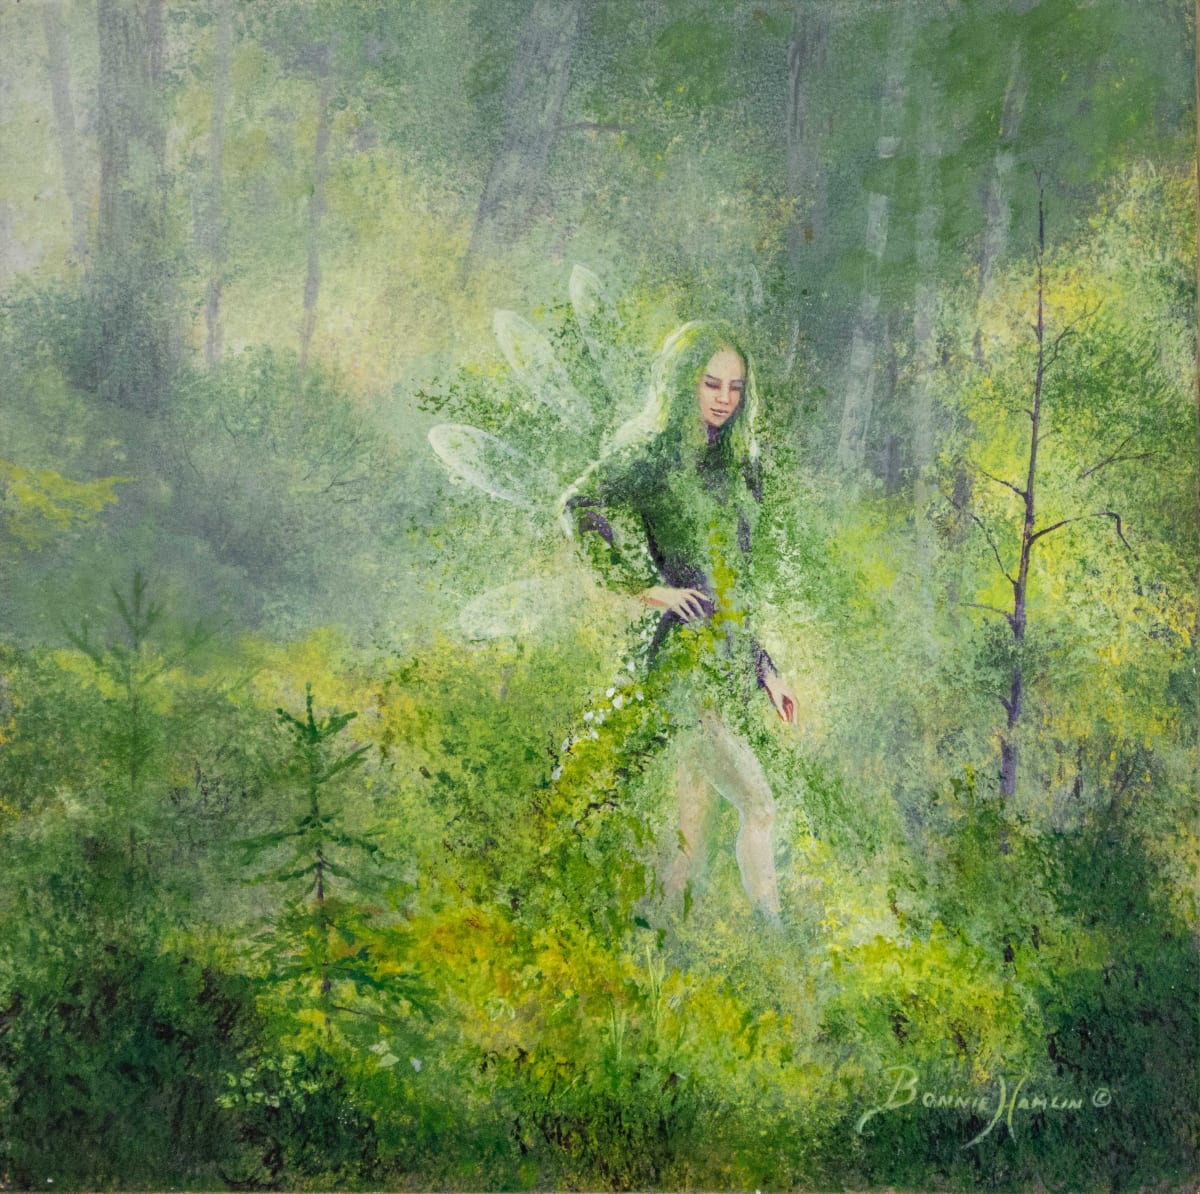 Forest Fairy Inner Peace by Bonnie Hamlin  Image: To walk in the sunbeams and feel total peace